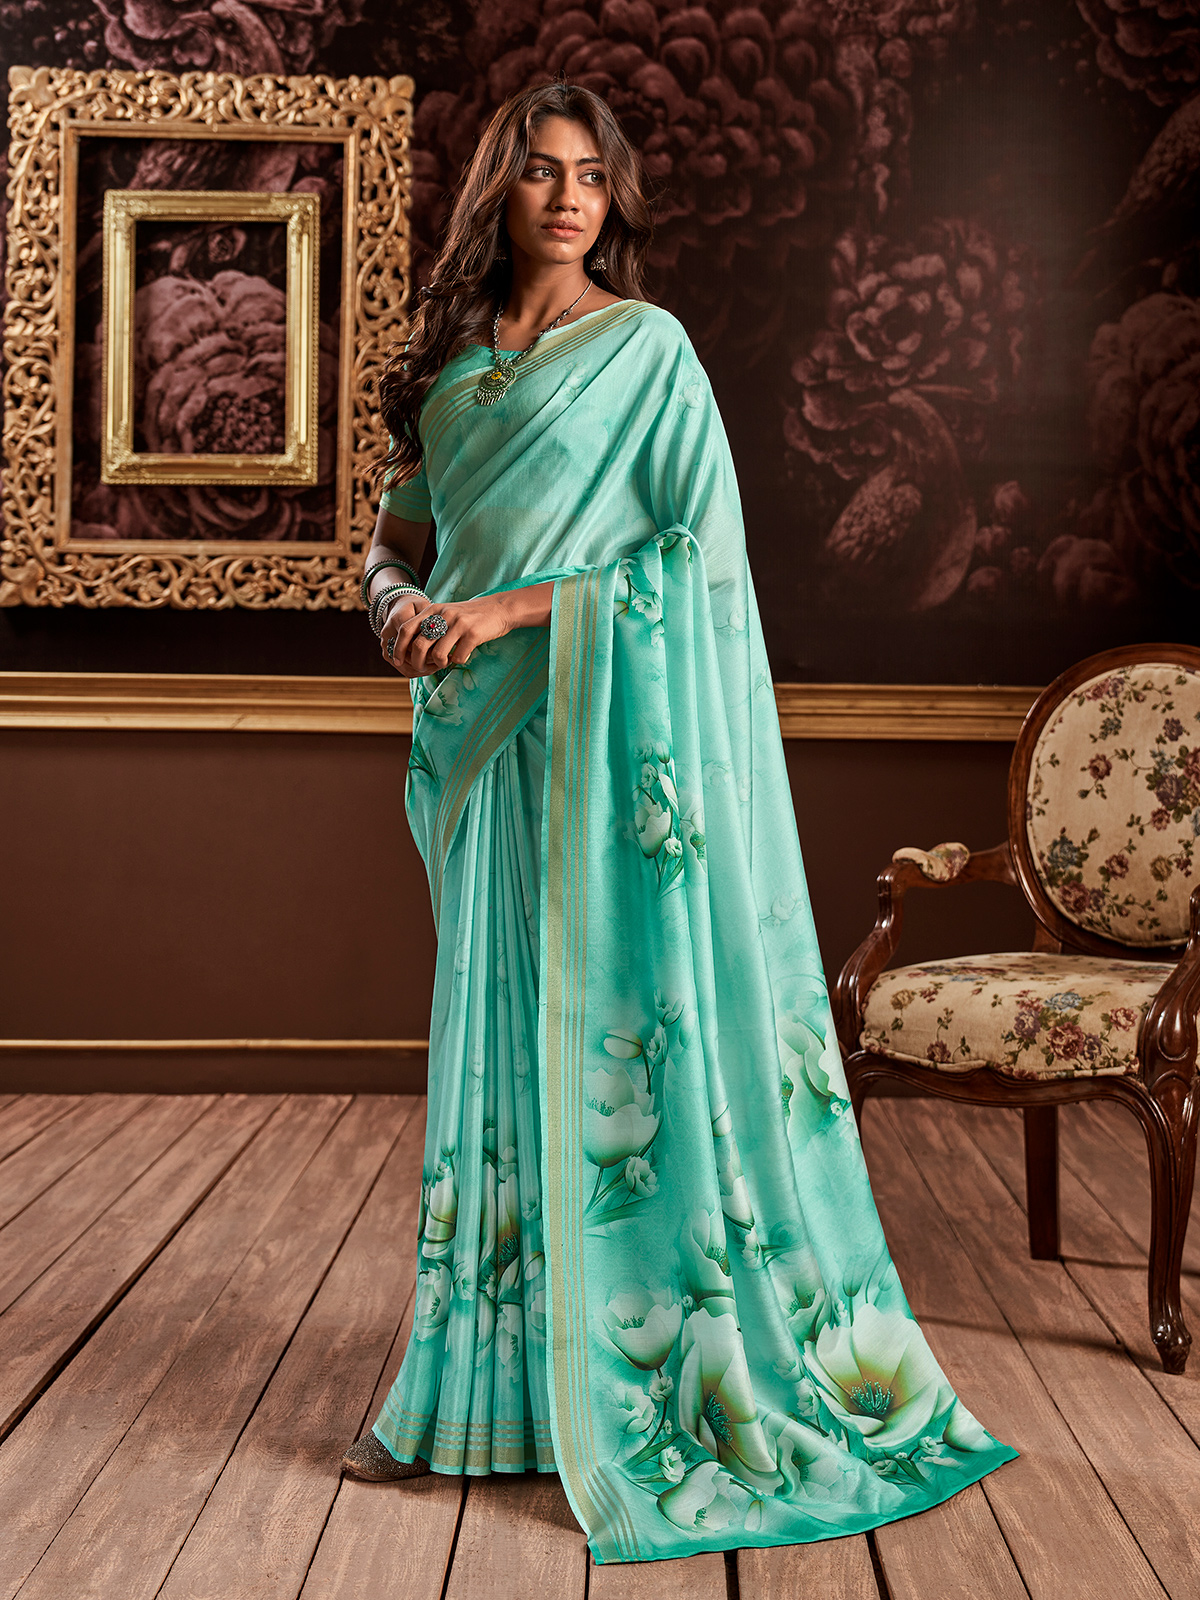 Silk Saree with blouse in Sea green colour 5305